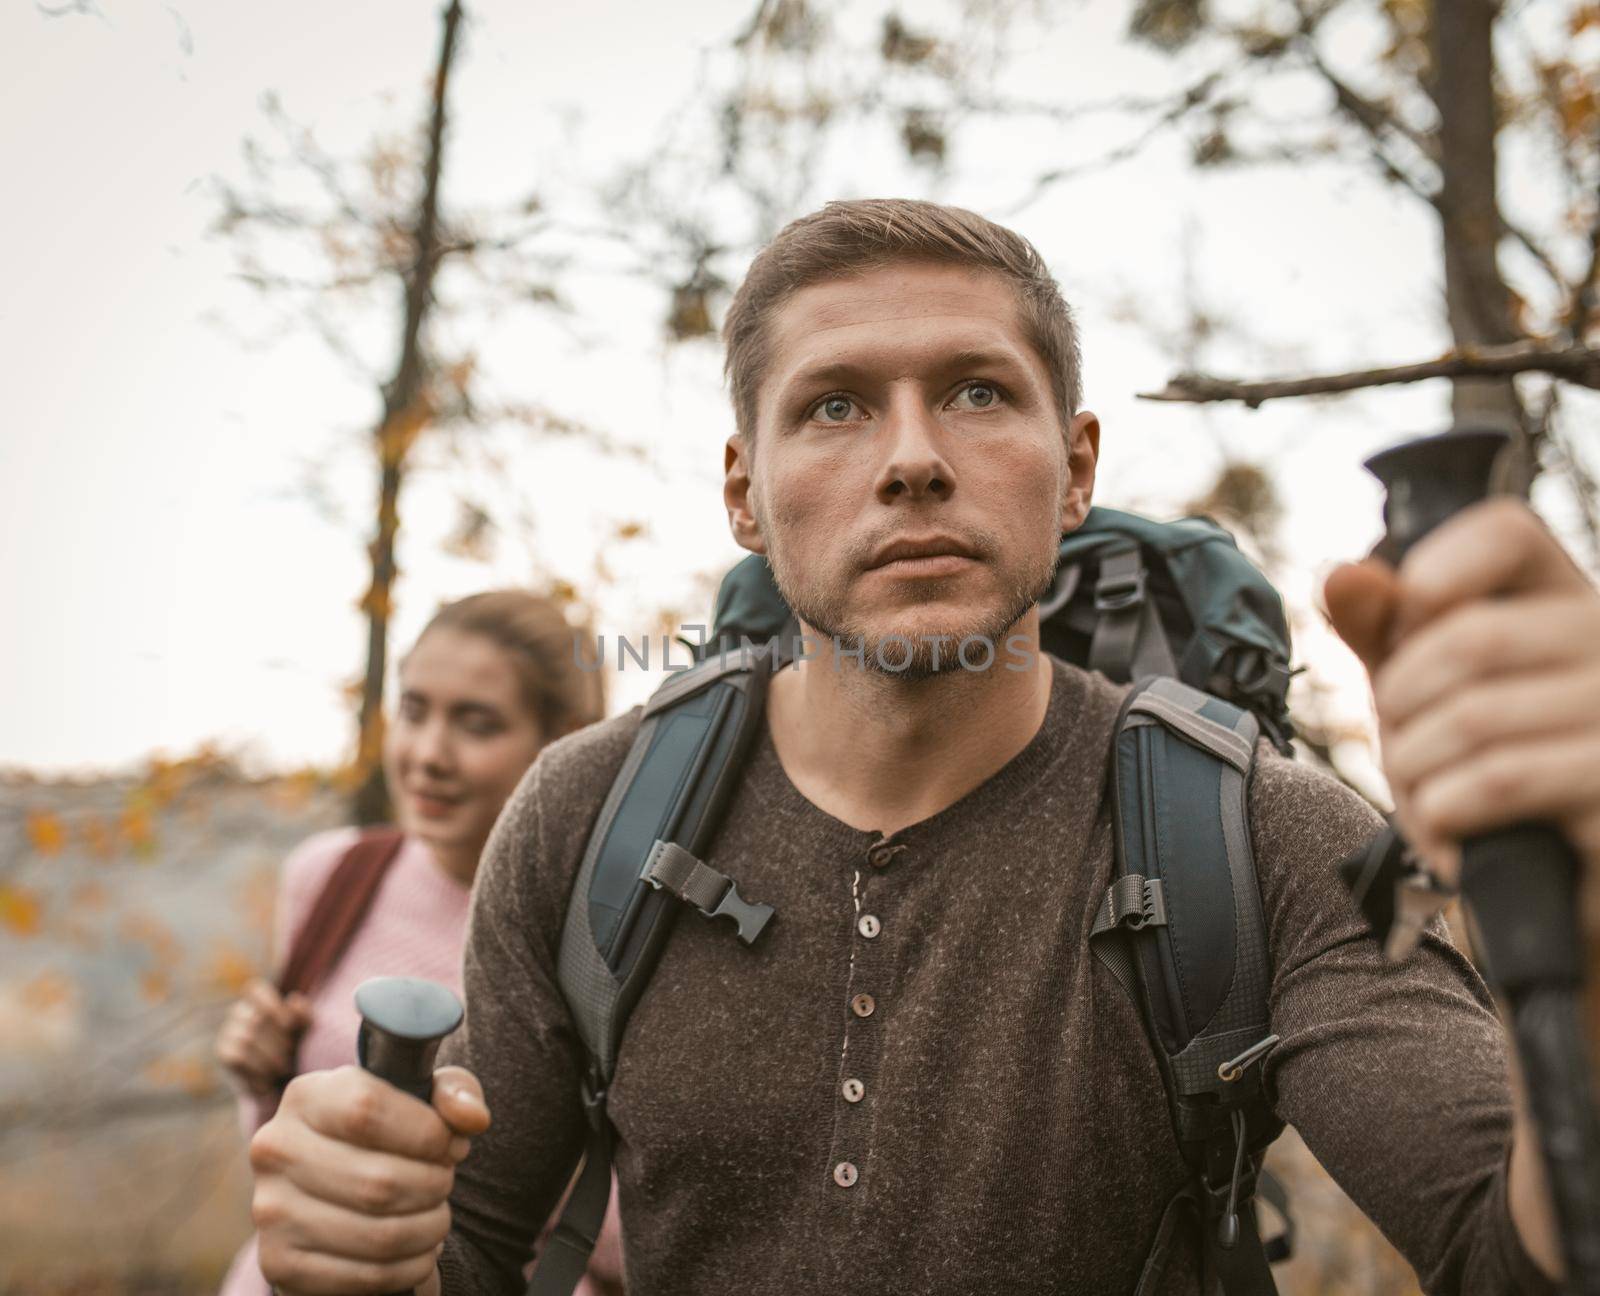 Man and a woman with backpacks walk together through the autumn forest, Selective focus on young man looking forward leaning on hiking pools. Family hiking Concept.